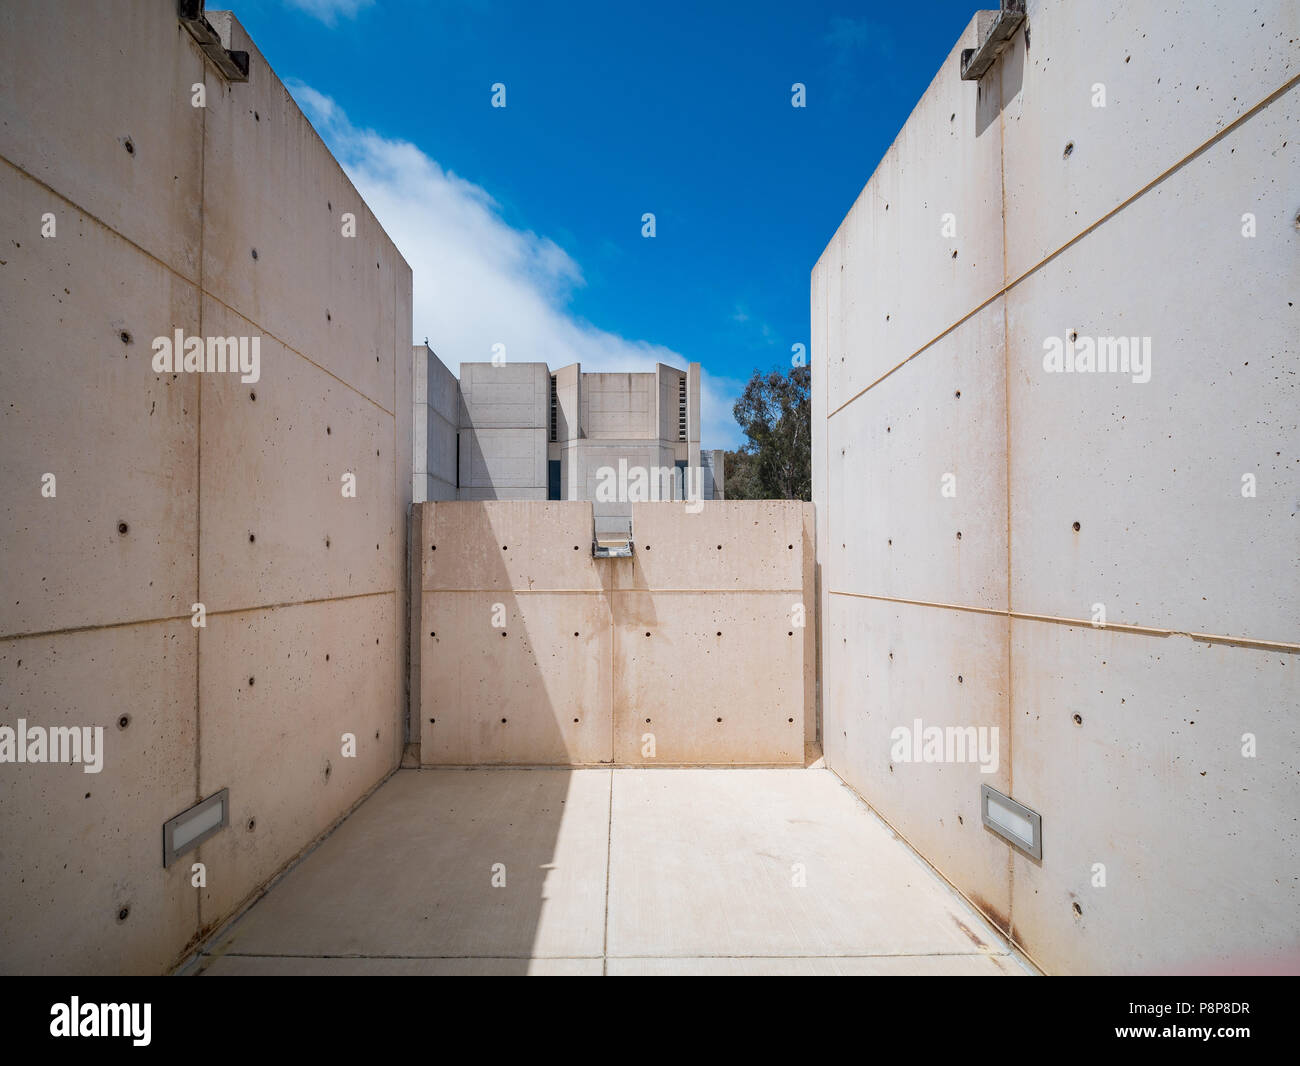 Student Project: Building Analysis of Salk Institute for Biological